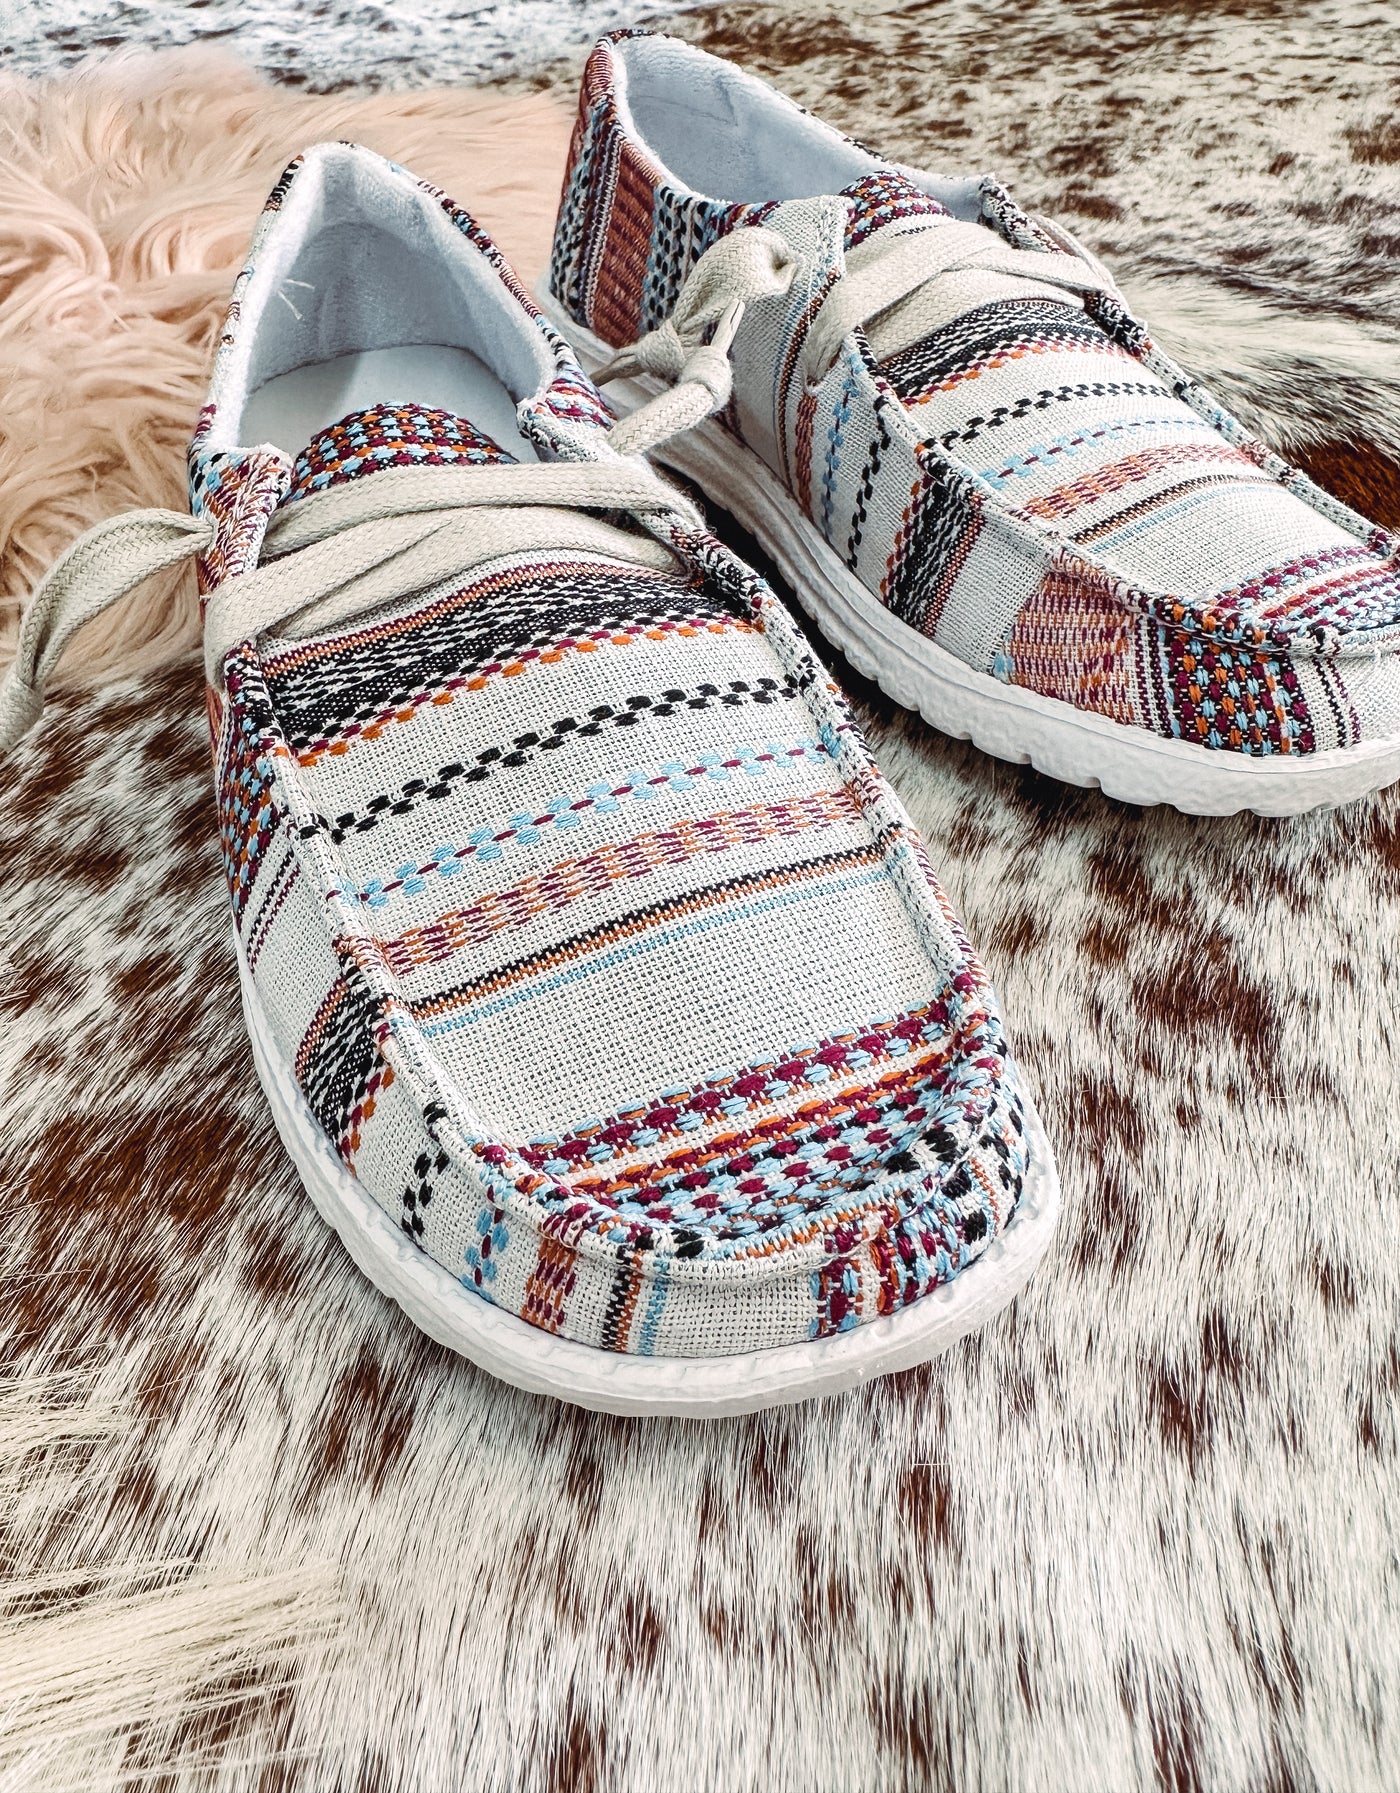 Picnic Cream Slip On's-302 FLATS-Gypsy Jazz-Adelyn Elaine's Boutique, Women's Clothing Boutique in Gilmer, TX